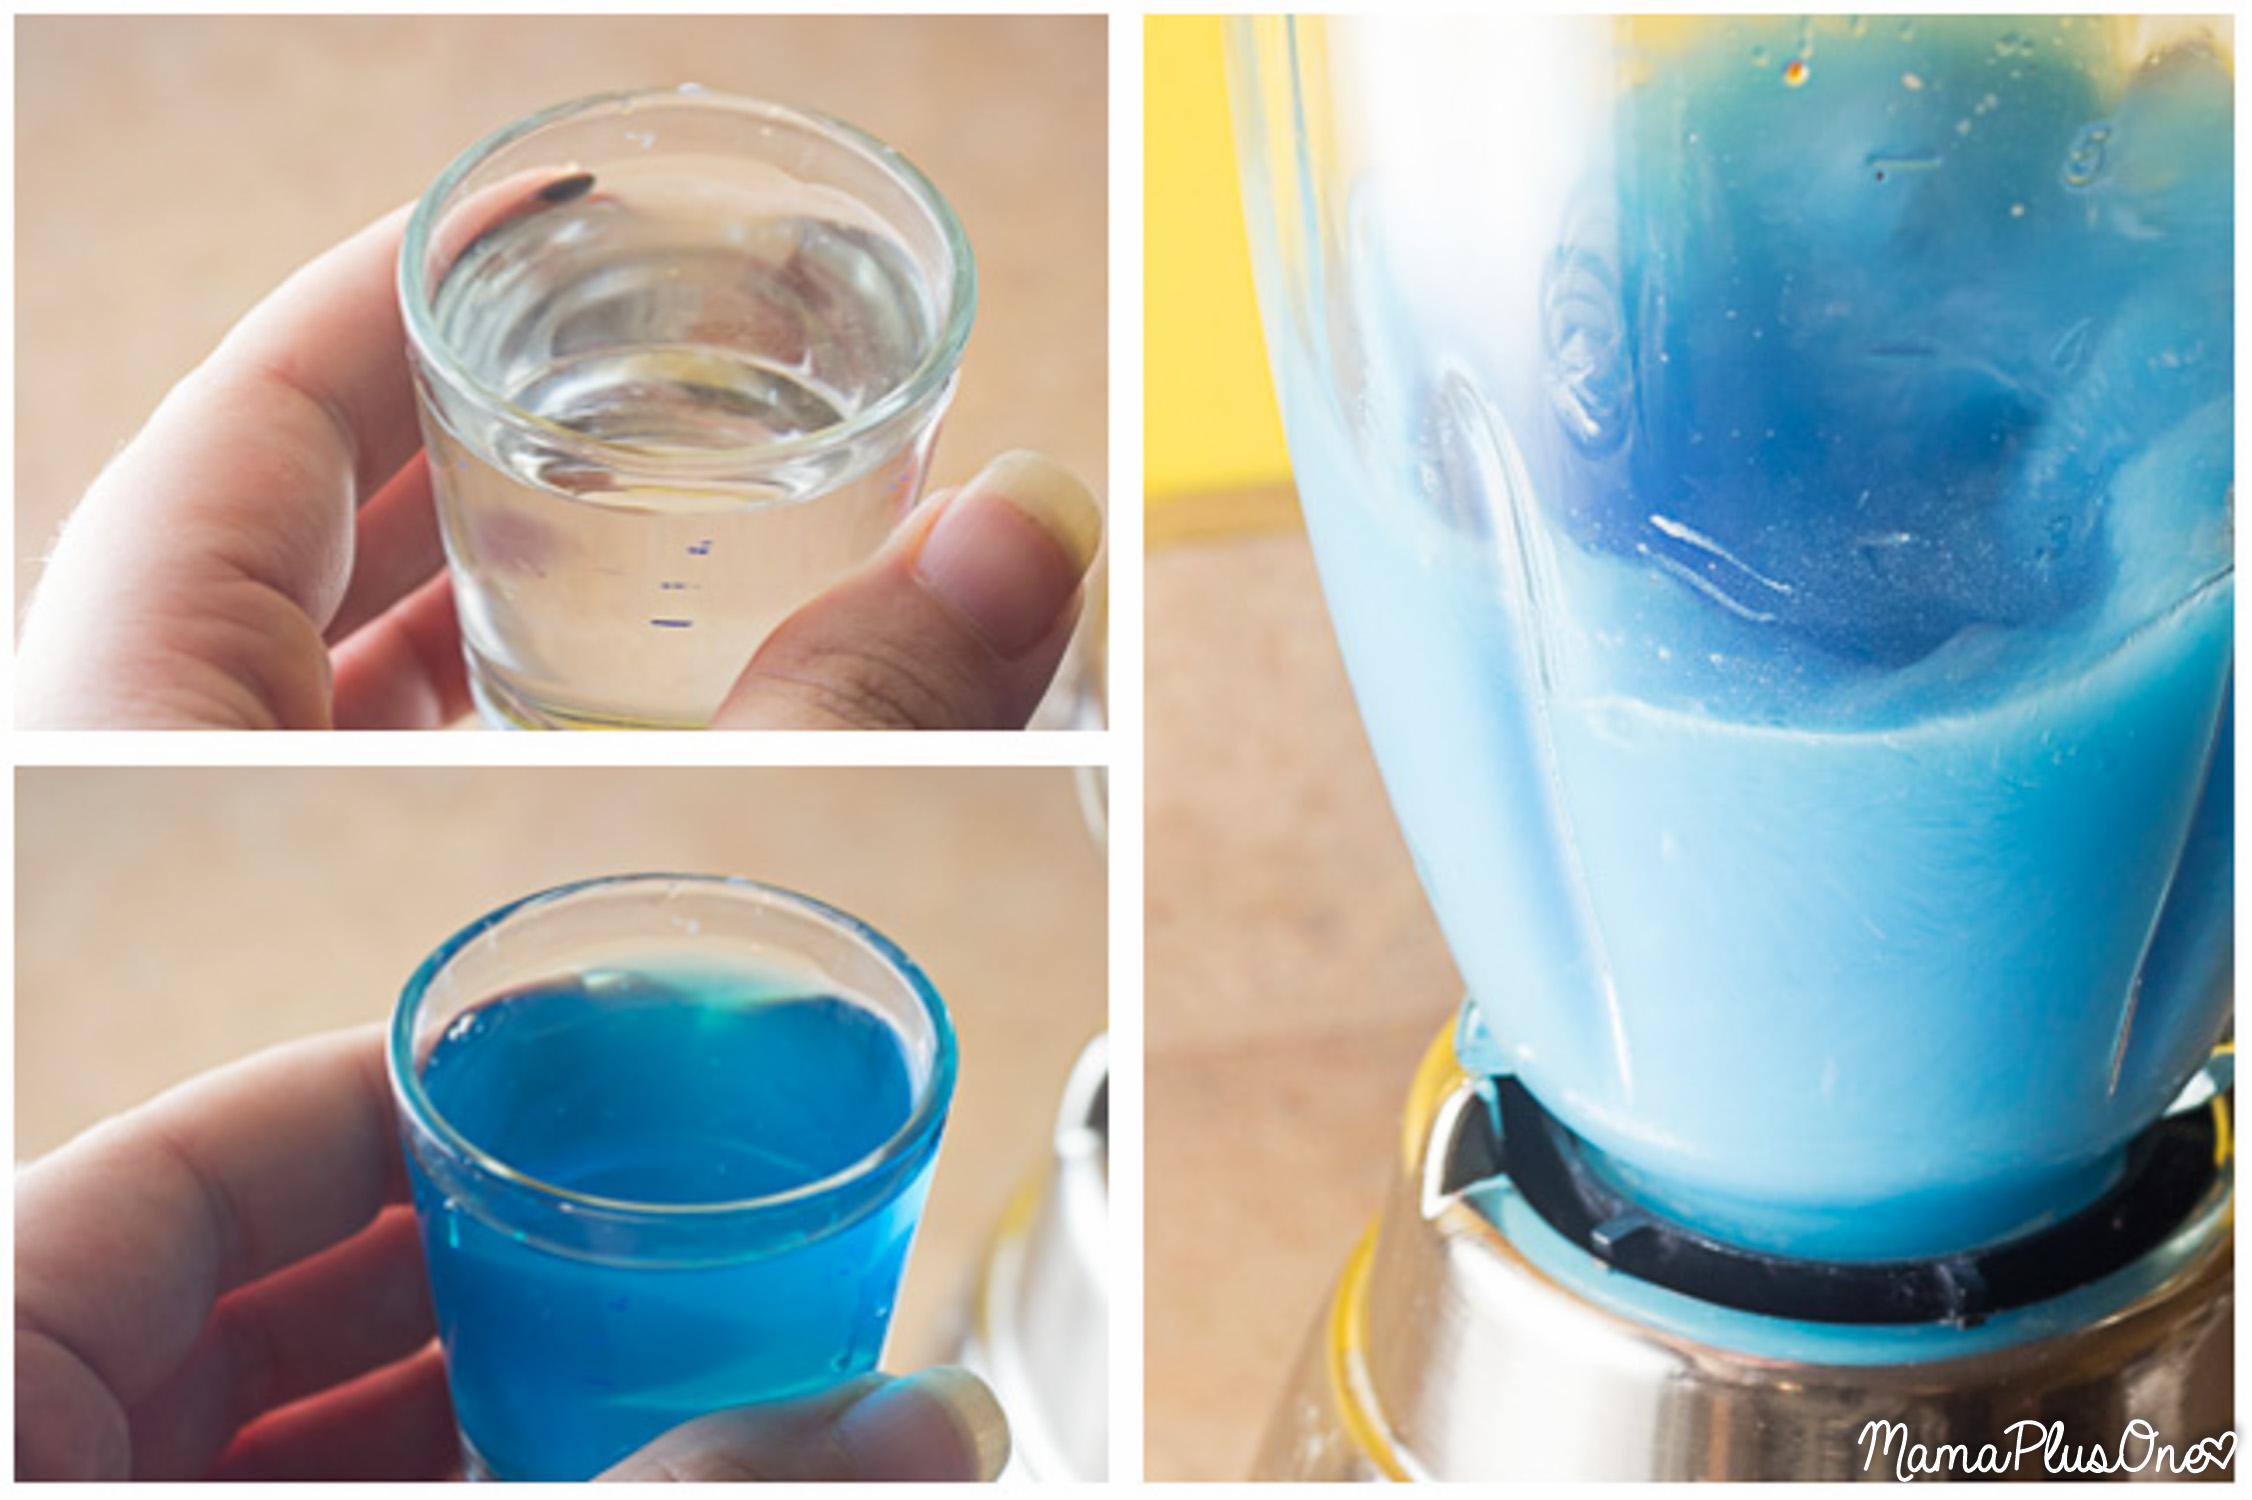 Celebrate the 4th of July with these red, white, and blue slushes that are easy to make and super refreshing! They're the perfect Independence Day mocktail that the whole family will love! Get star-spangled and layer them, or enjoy the individual components. You can't go wrong with this patriotic drink!